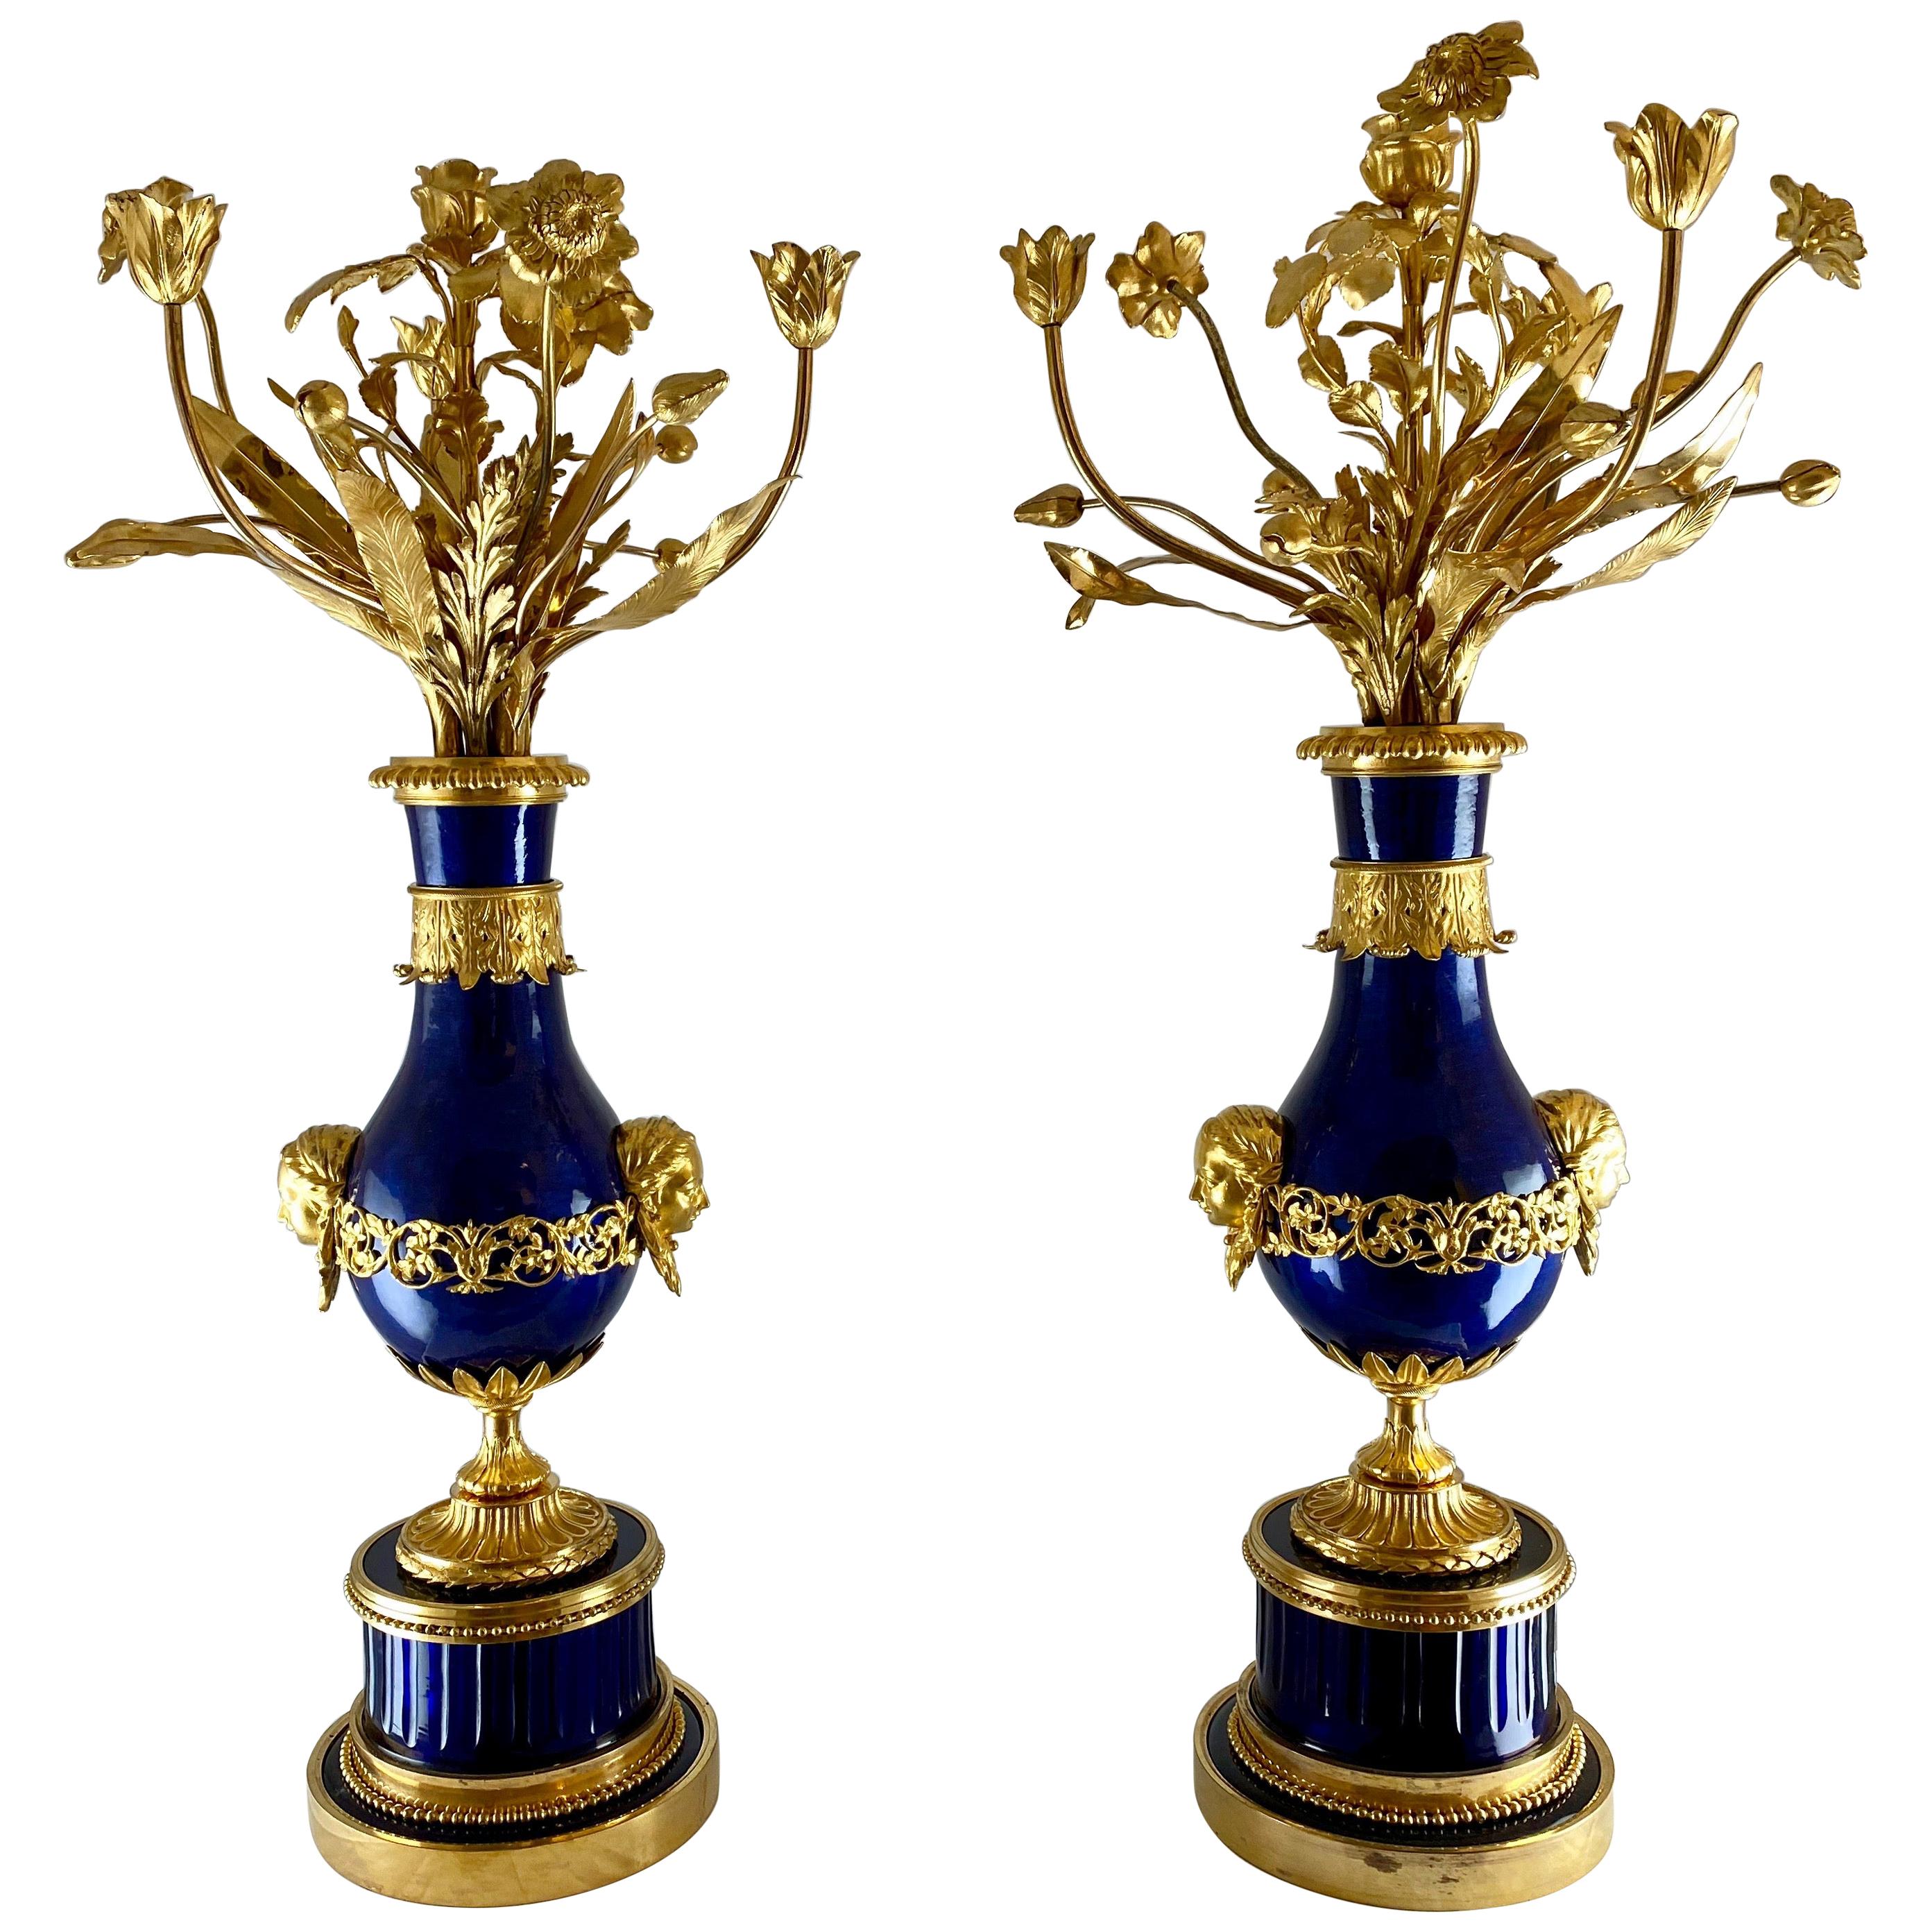 A fantastic pair of candelabra made in the late 18th century. The bases are made of thick coboltblue cut glass which is very unusual. The baluster shaped vases are made of silvered copper which are enammeled blue . The metal parts, which all are of